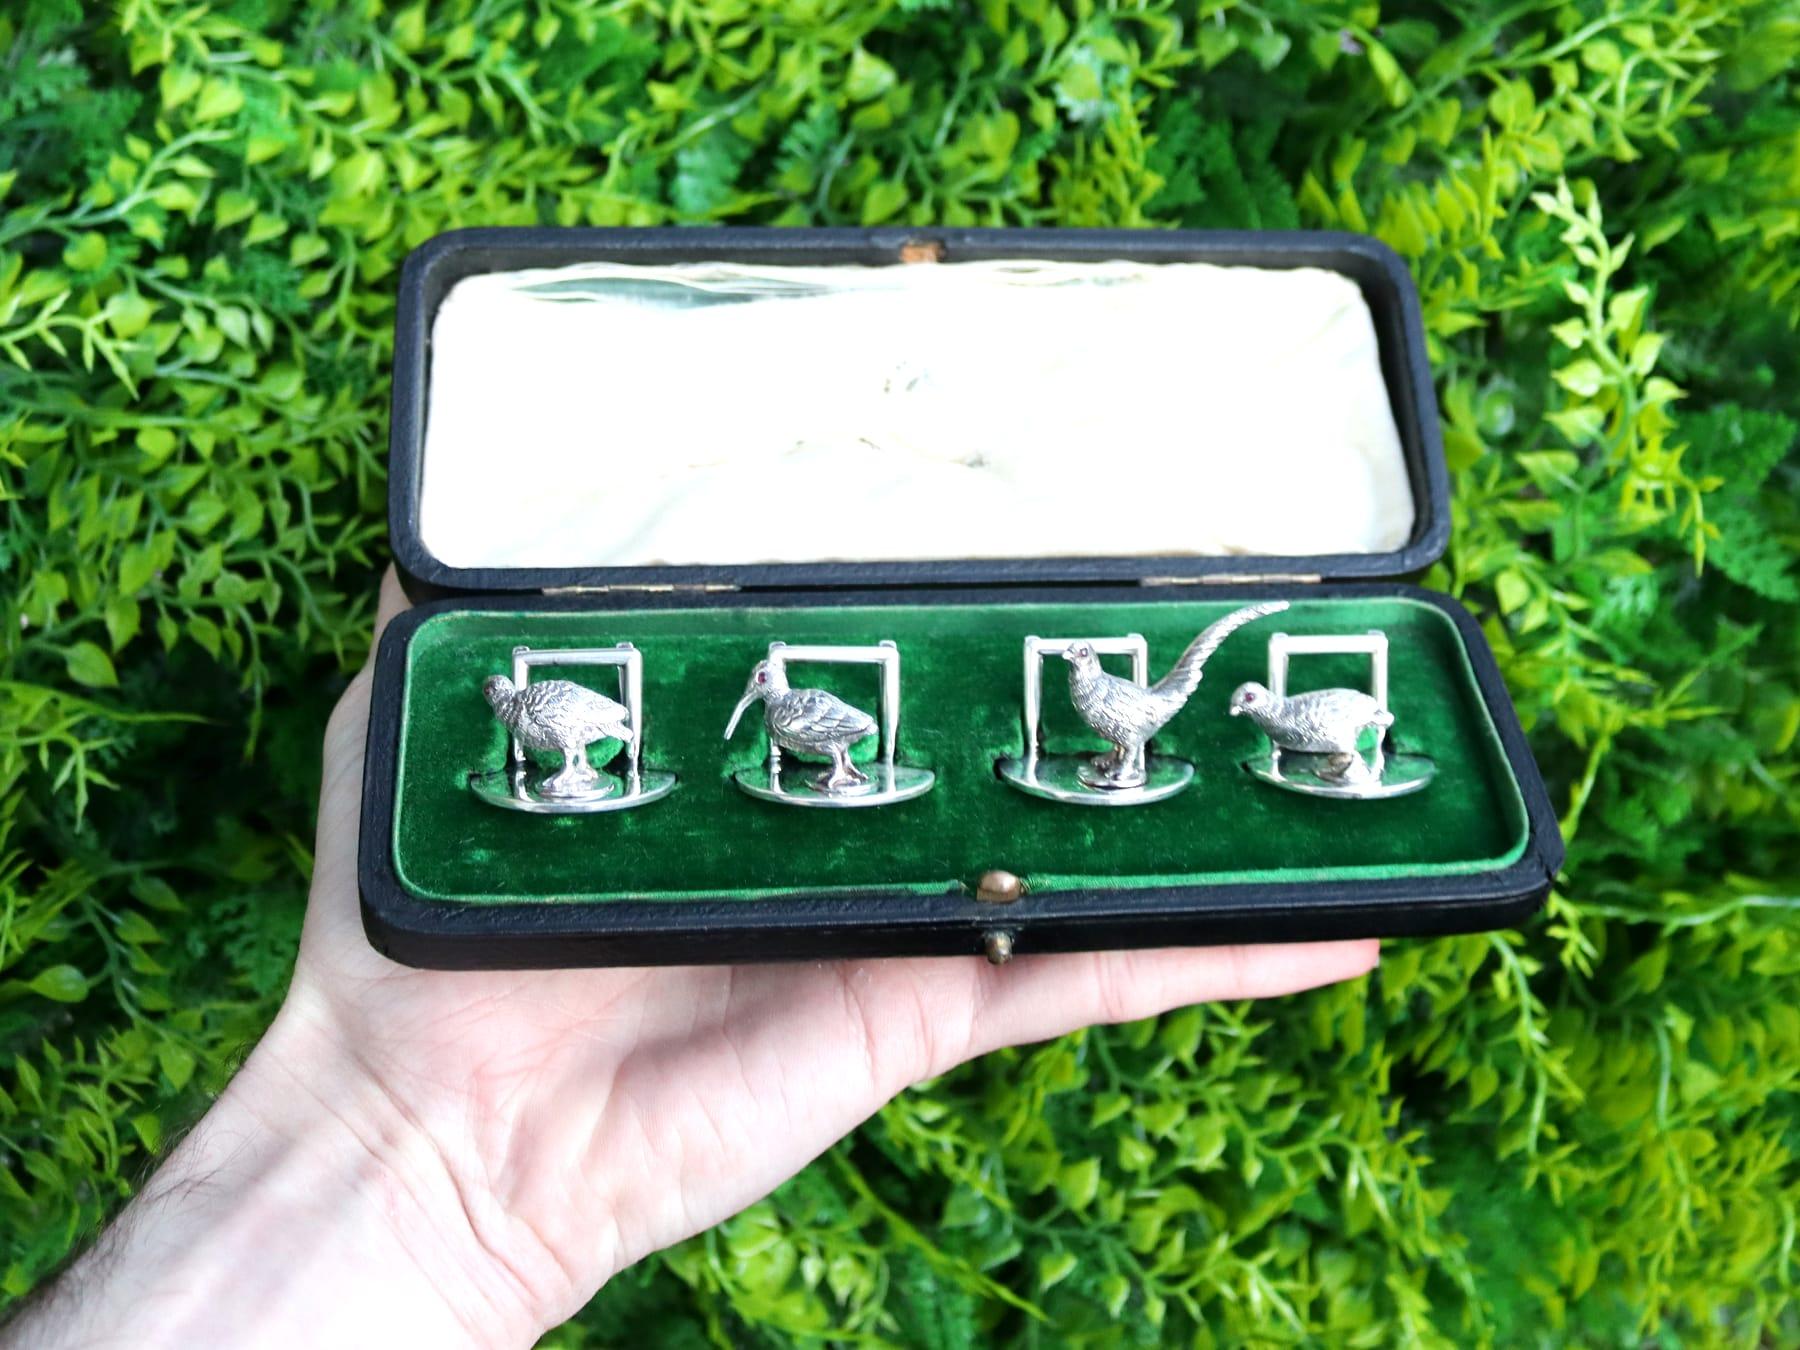 An exceptional, fine and impressive set of four antique Edwardian English sterling silver menu / card holders - boxed; an addition to our diverse dining silverware collection.

These exceptional antique Edwardian sterling silver menu holders have